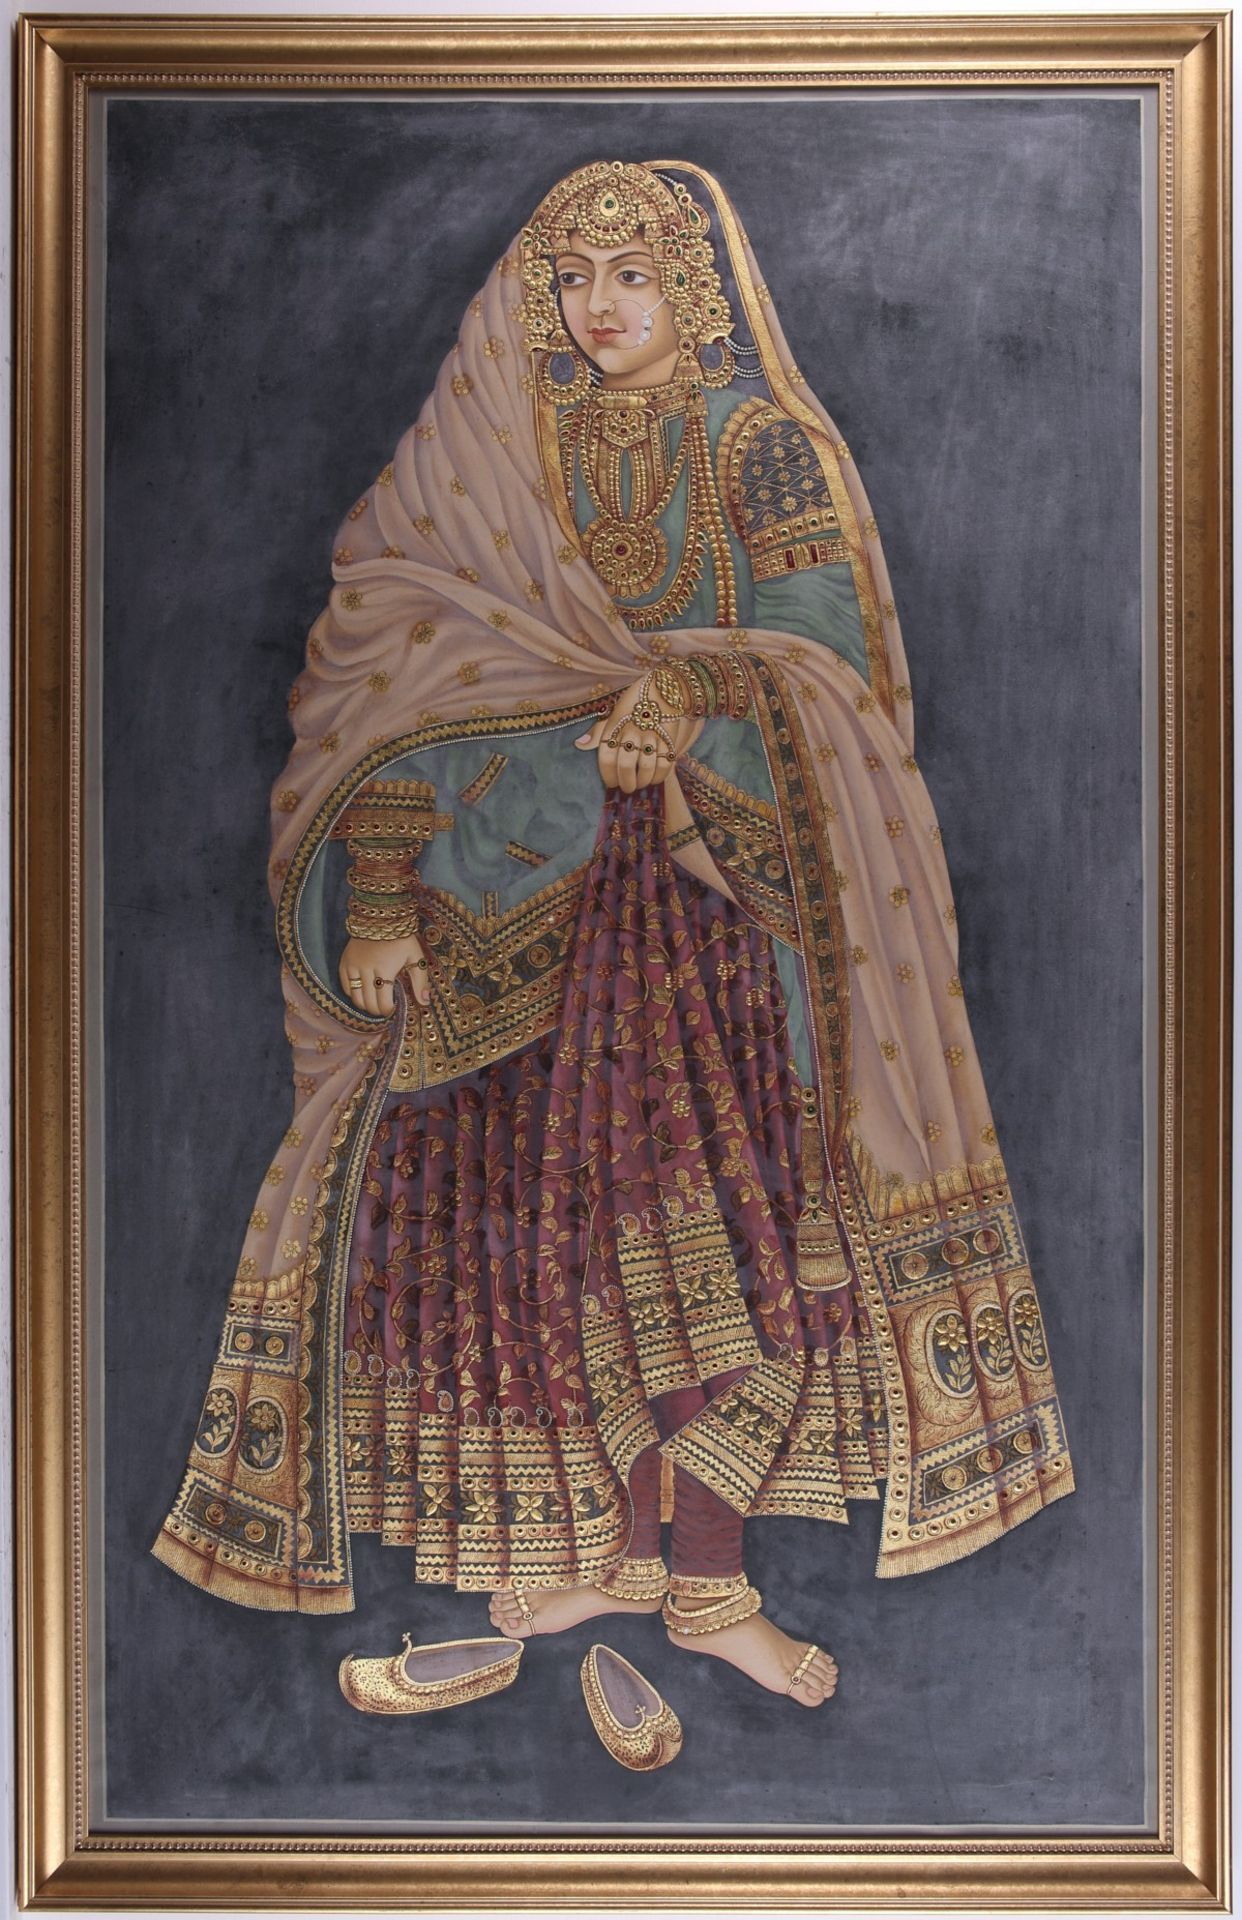 Massive Indian Painting Woman in Elaborate Dress - Image 2 of 5